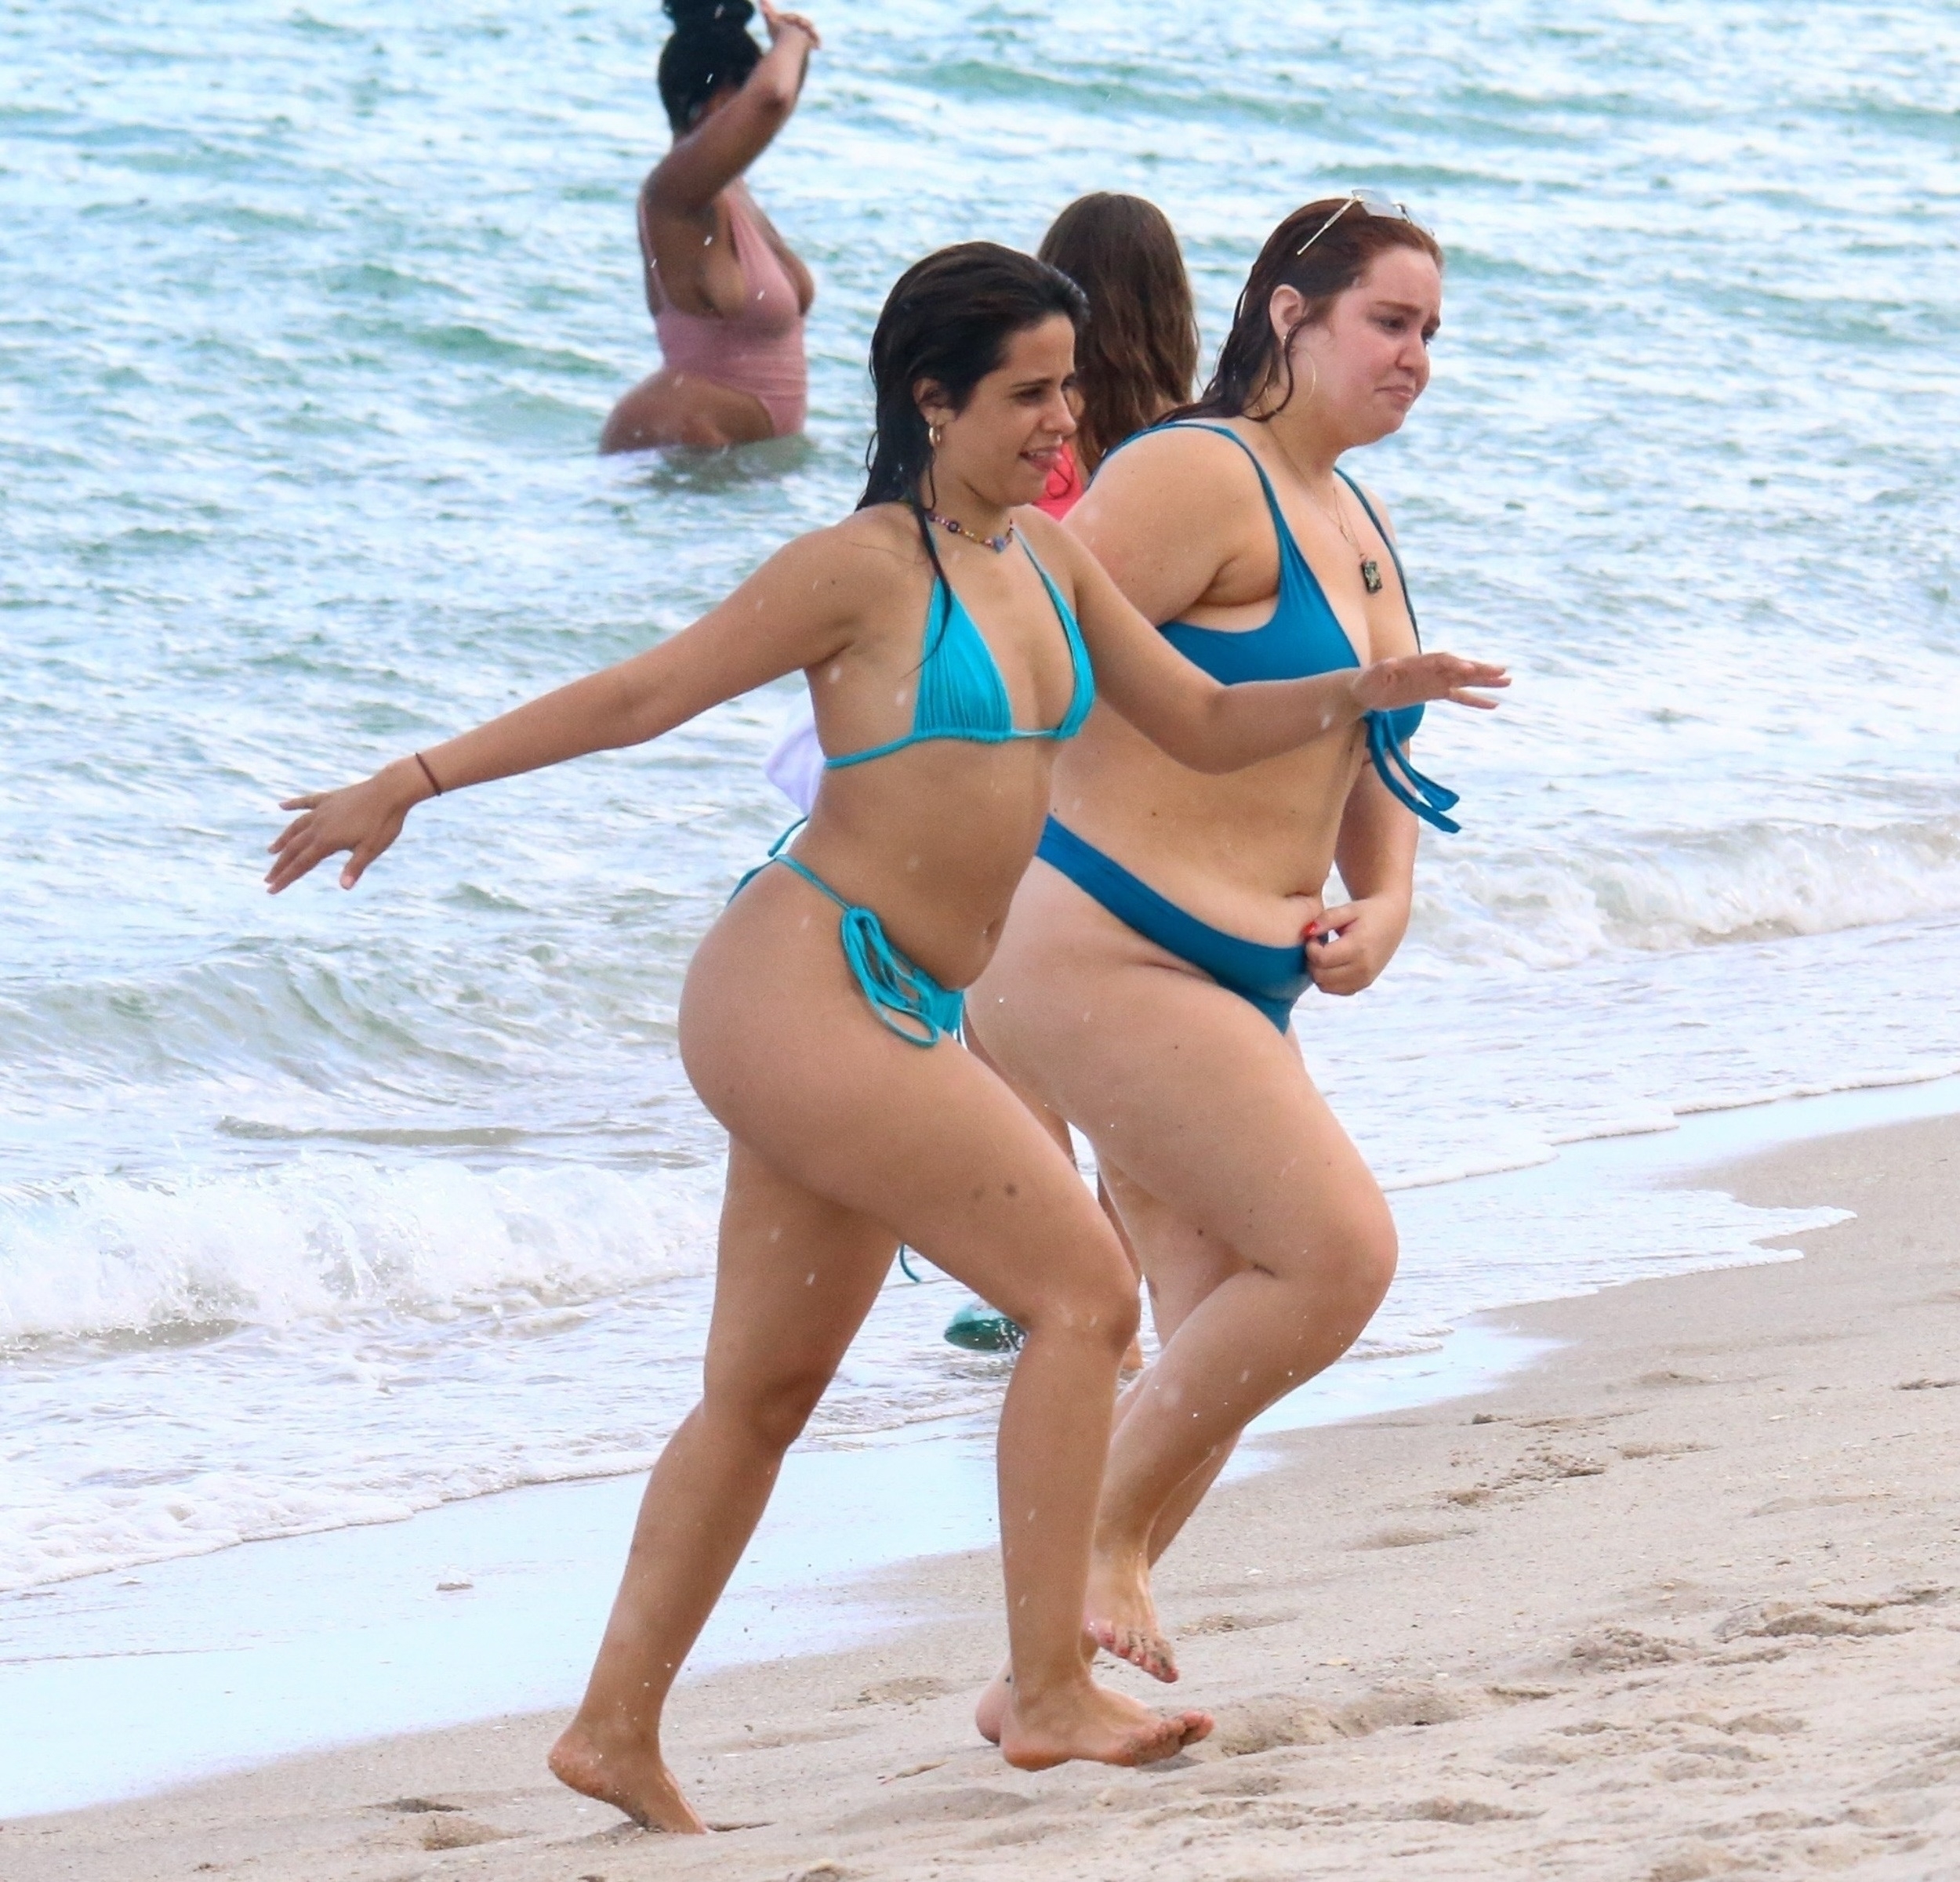 A fun afternoon.  Camila Cabello enjoyed a sunny day on the beaches of Miami with a group of her friends.  They sunbathed, entertained and cooled off in the sea (Photos: The Grosby Group)